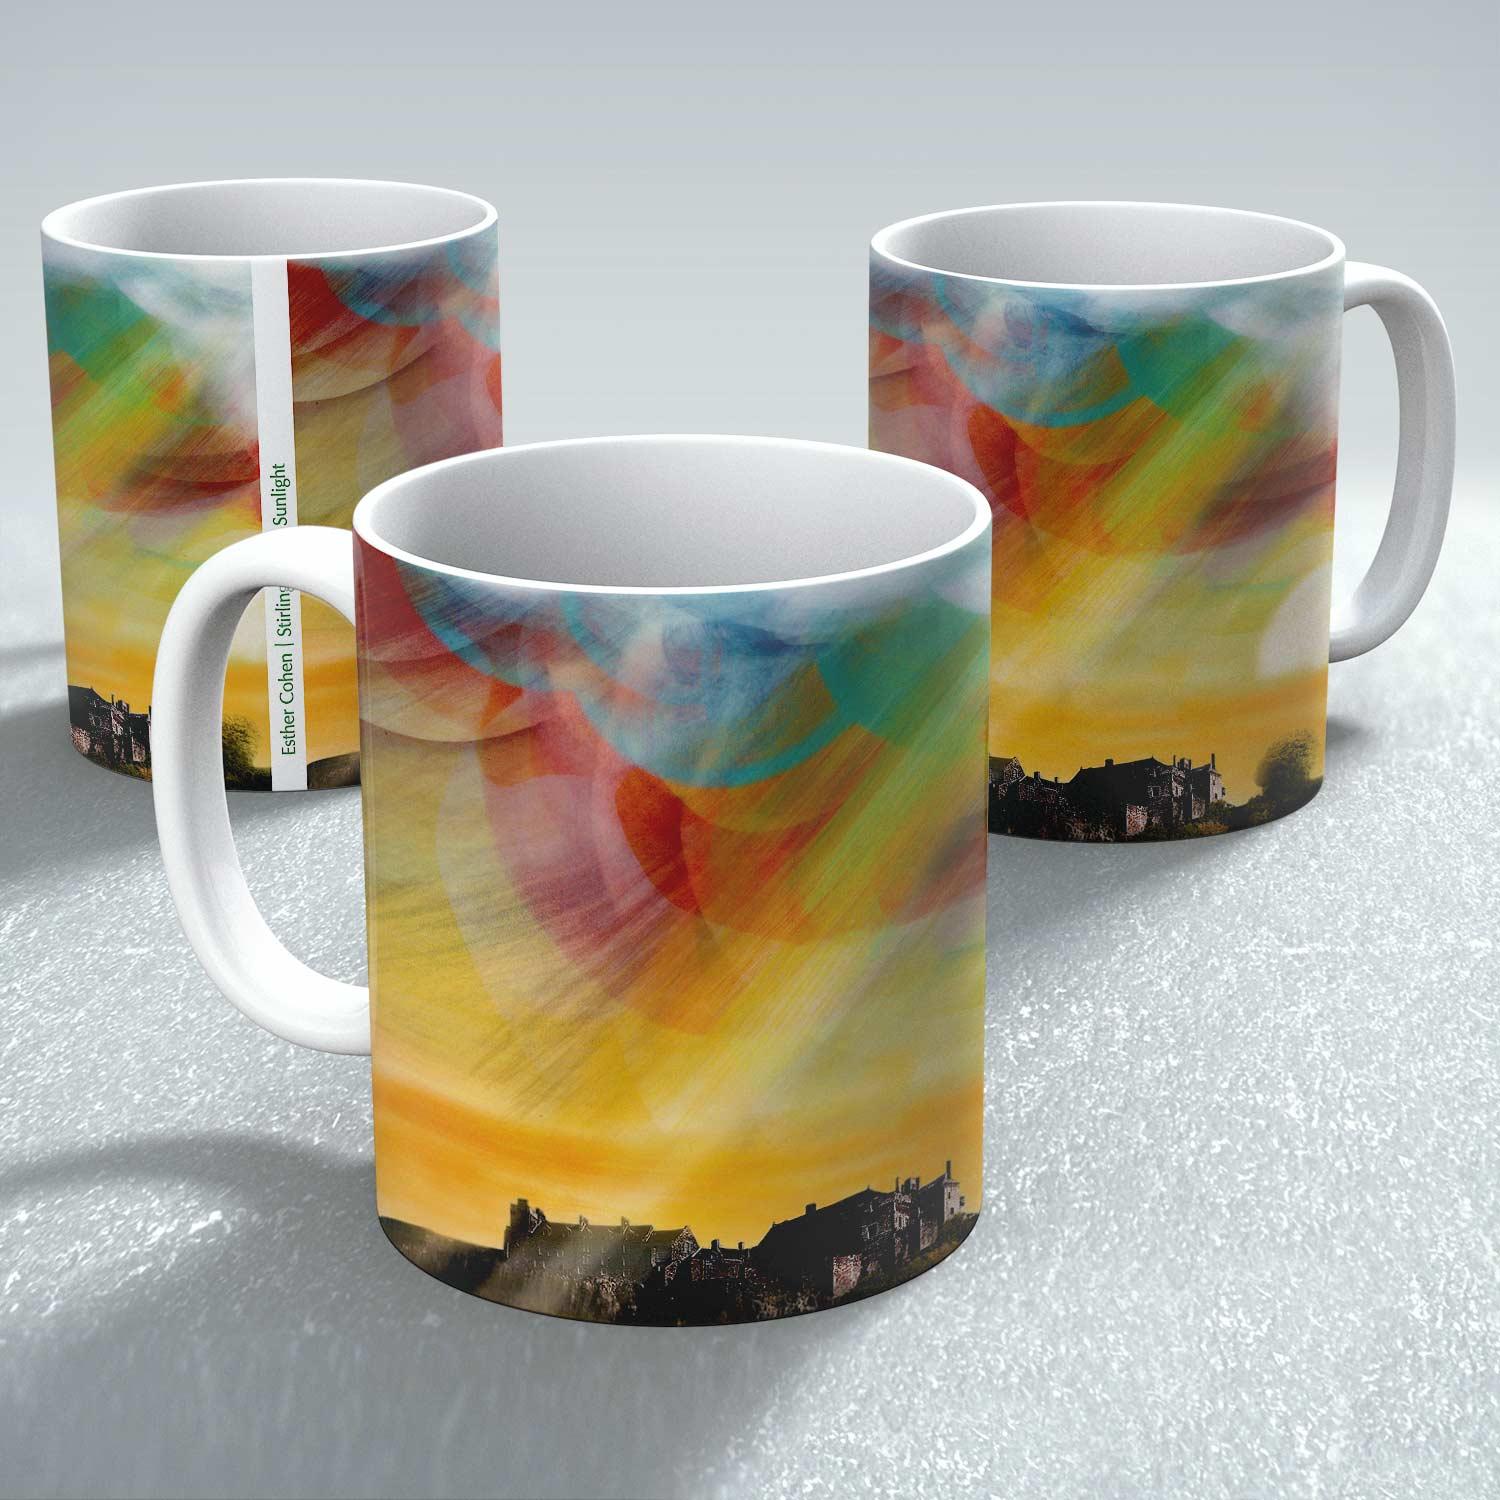 Stirling Castle Sunlight Mug from an original painting by artist Esther Cohen